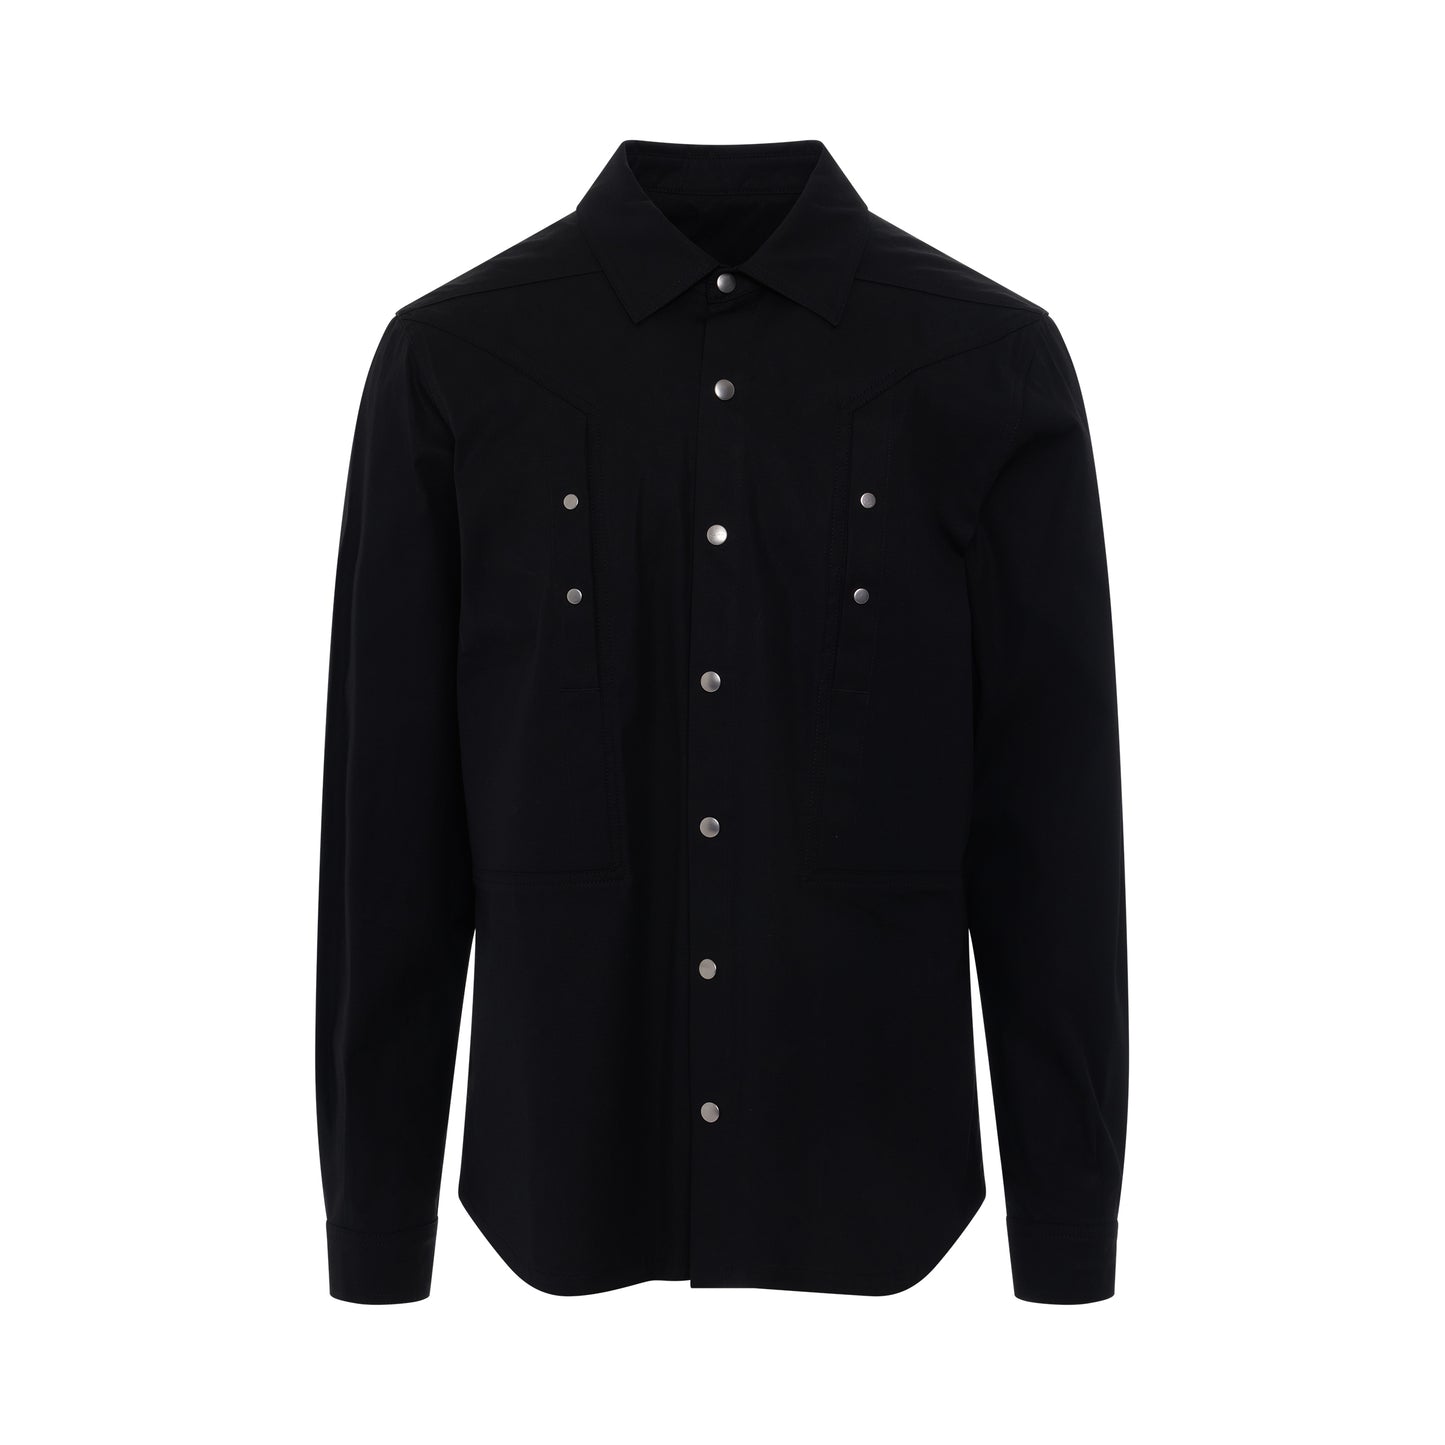 Woven Outer Shirt in Black